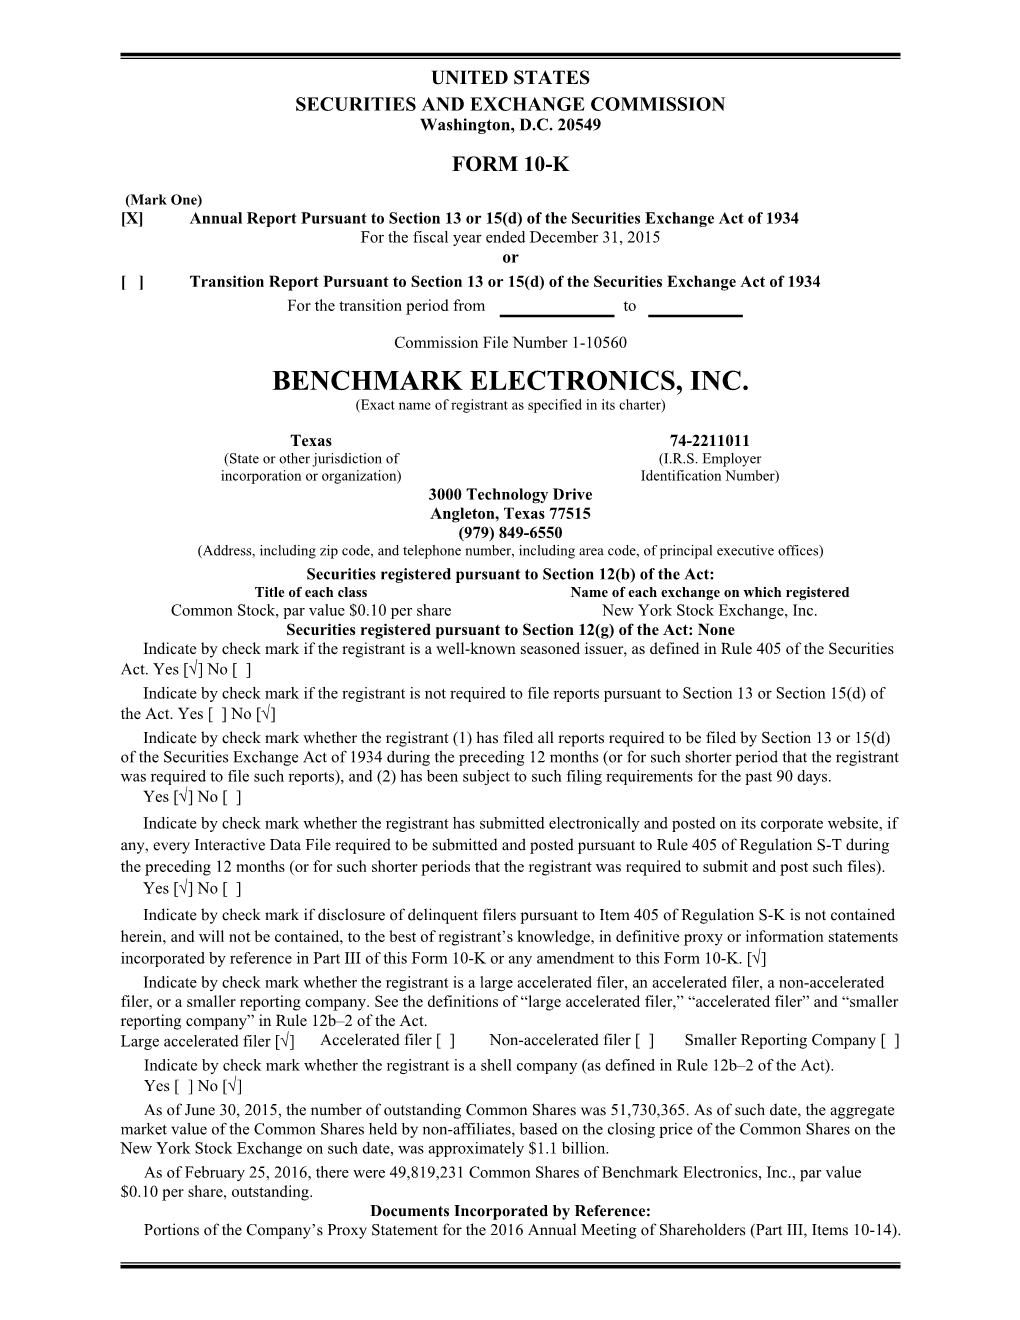 BENCHMARK ELECTRONICS, INC. (Exact Name of Registrant As Specified in Its Charter)